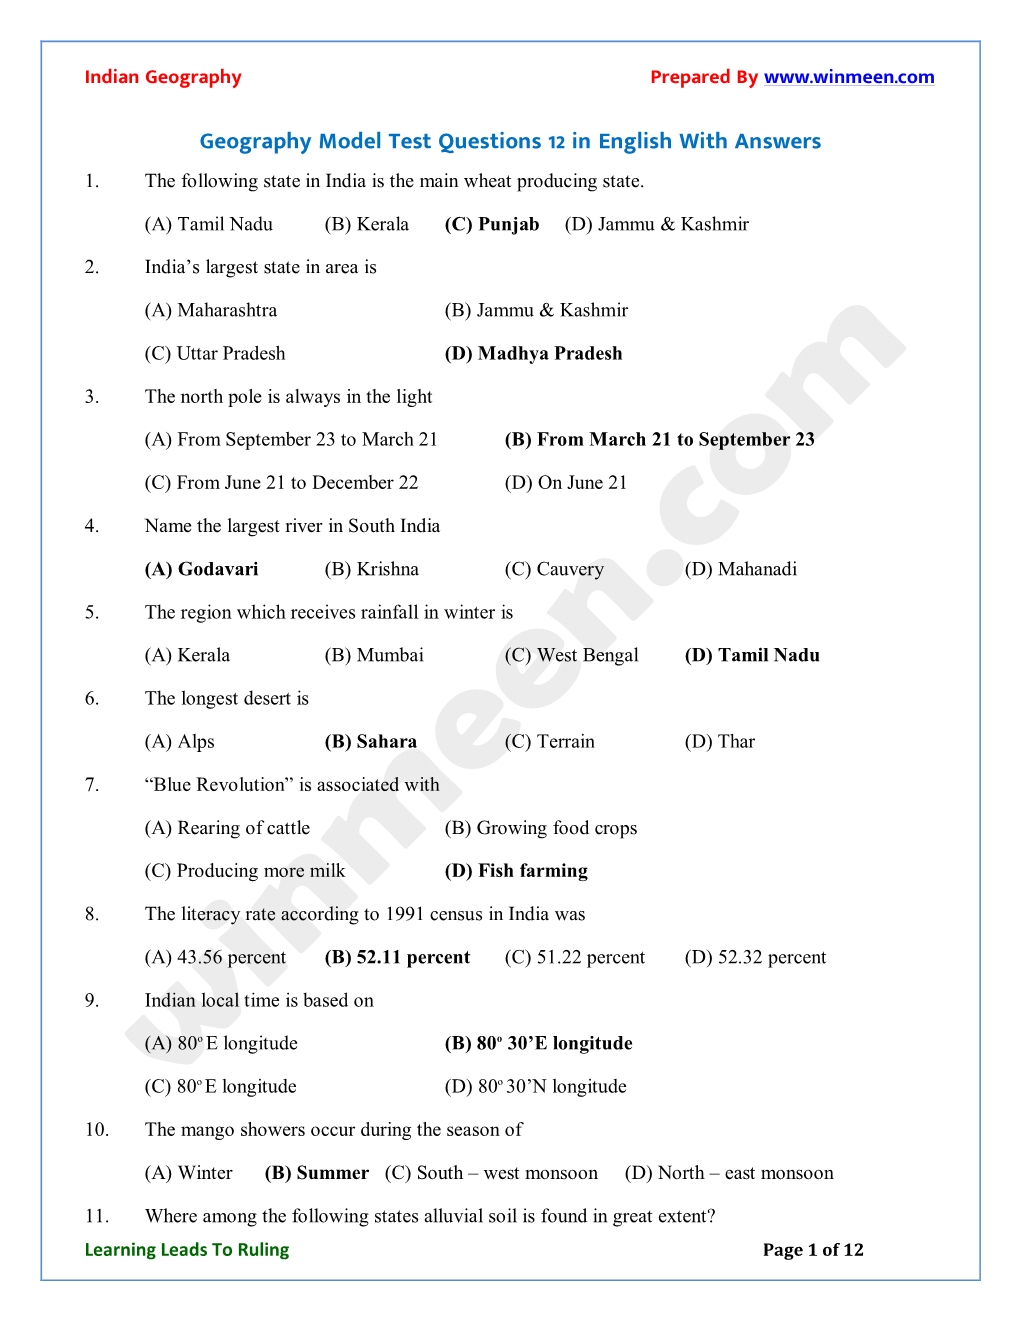 Geography Model Test Questions 12 in English with Answers 1